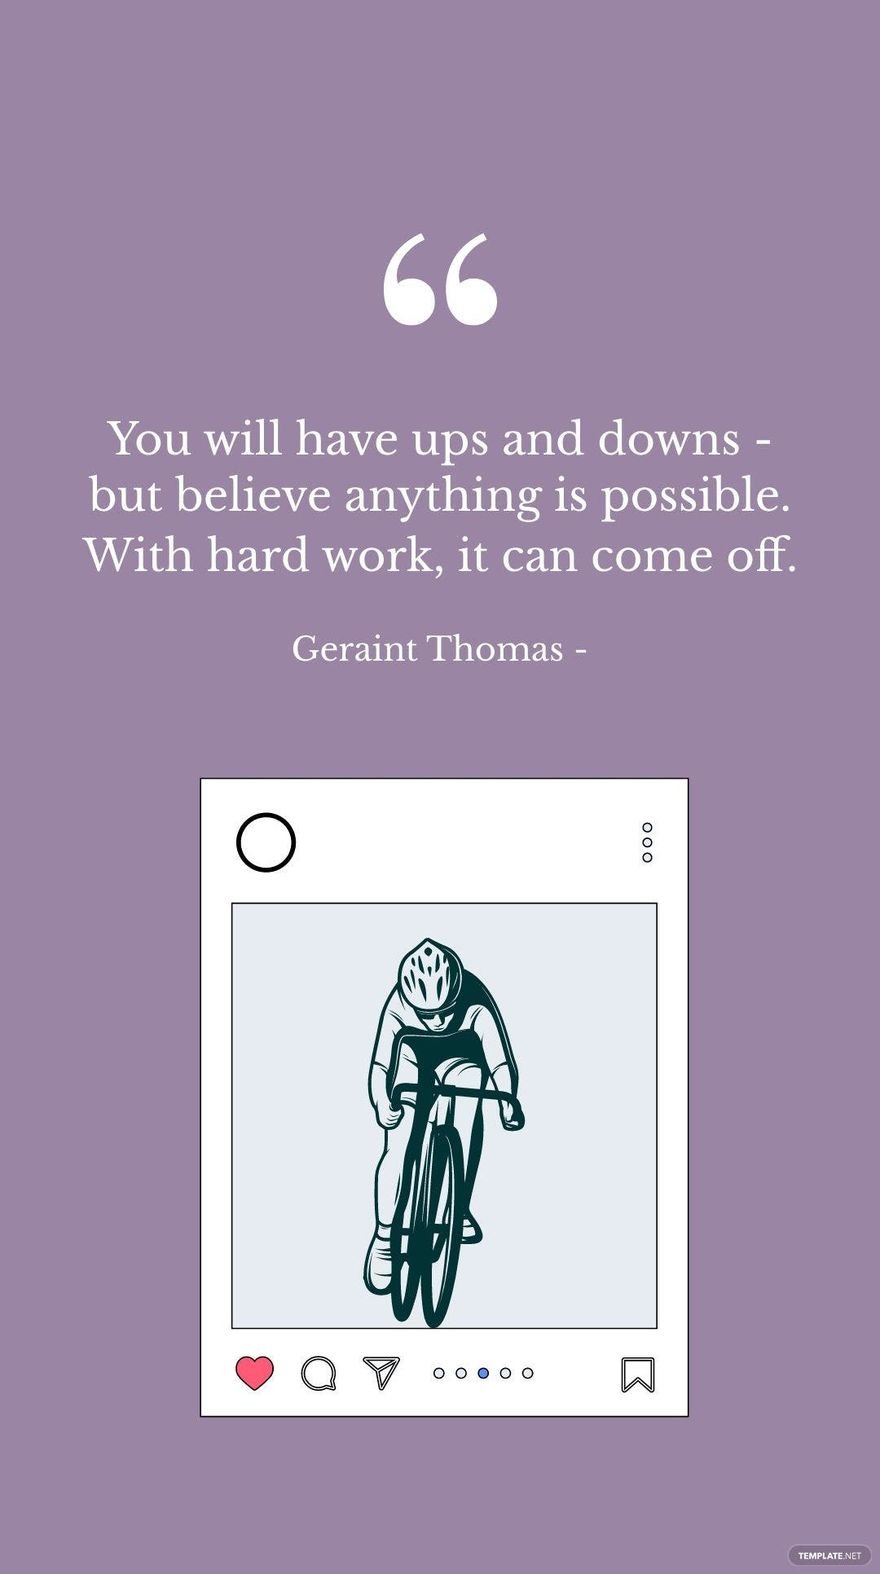 Geraint Thomas - You will have ups and downs - but believe anything is possible. With hard work, it can come off.